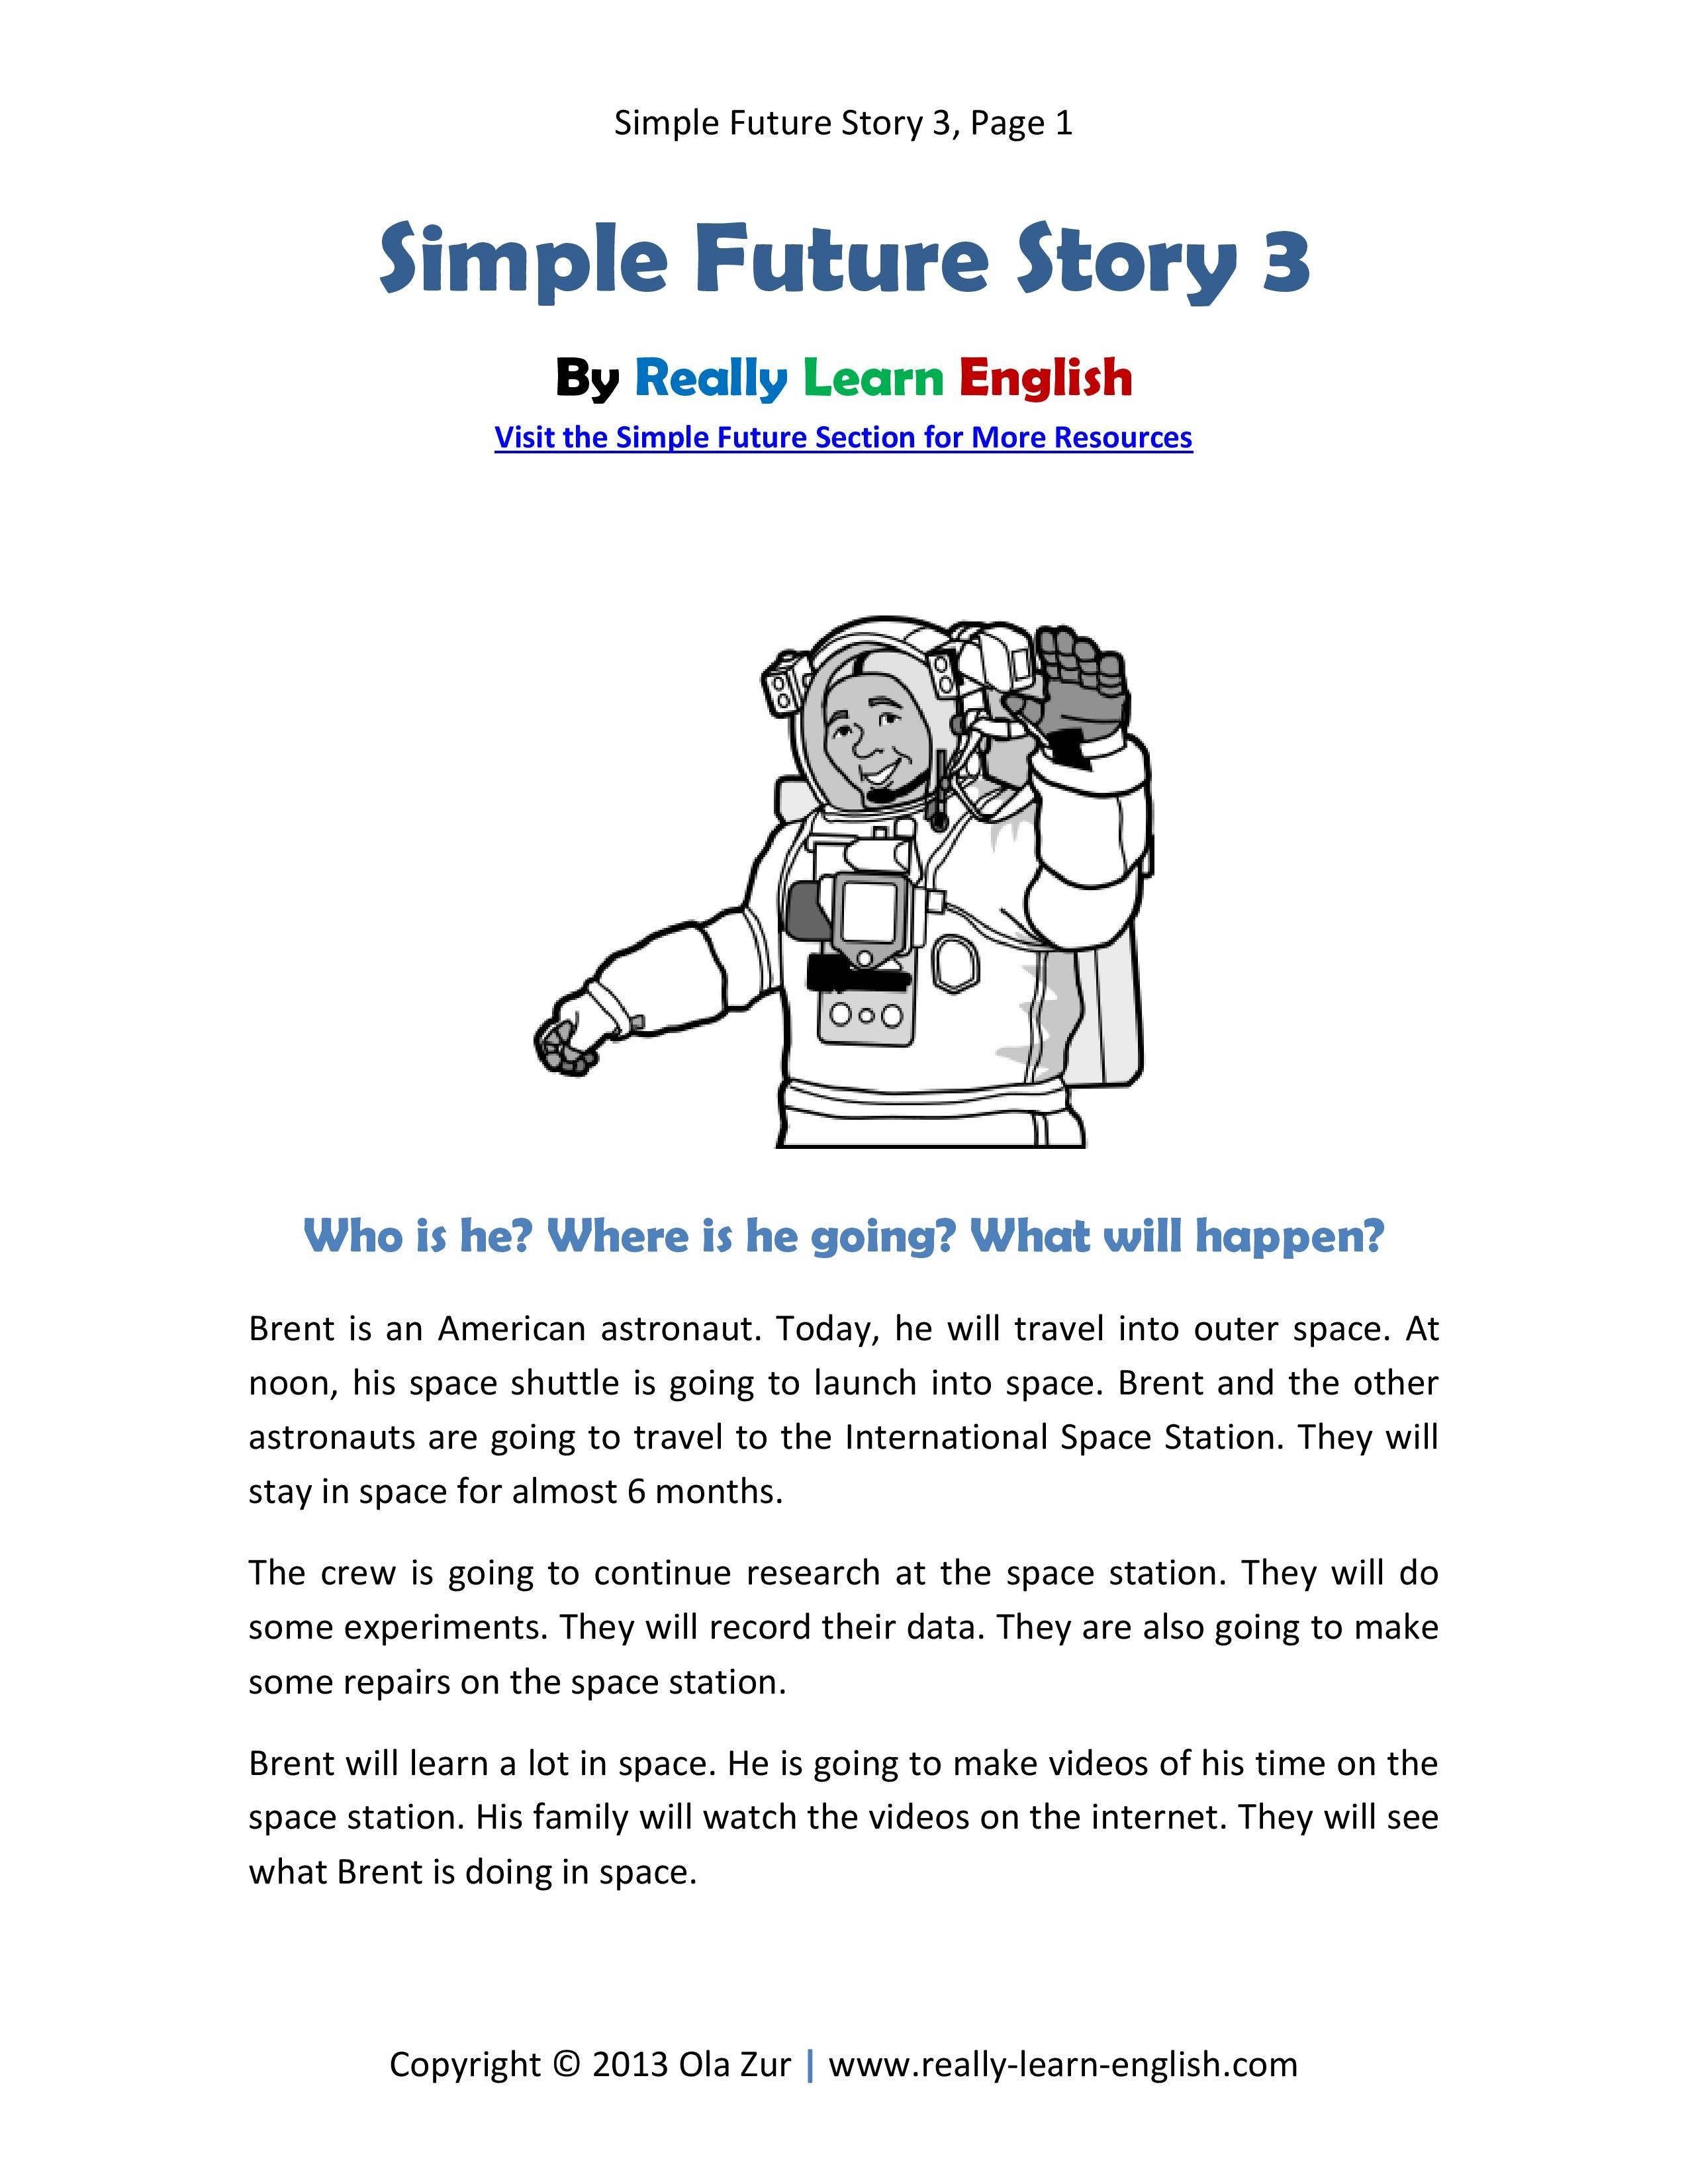 Free Printable Story And Exercises To Practice The English Simple - Free Printable High Interest Low Reading Level Stories